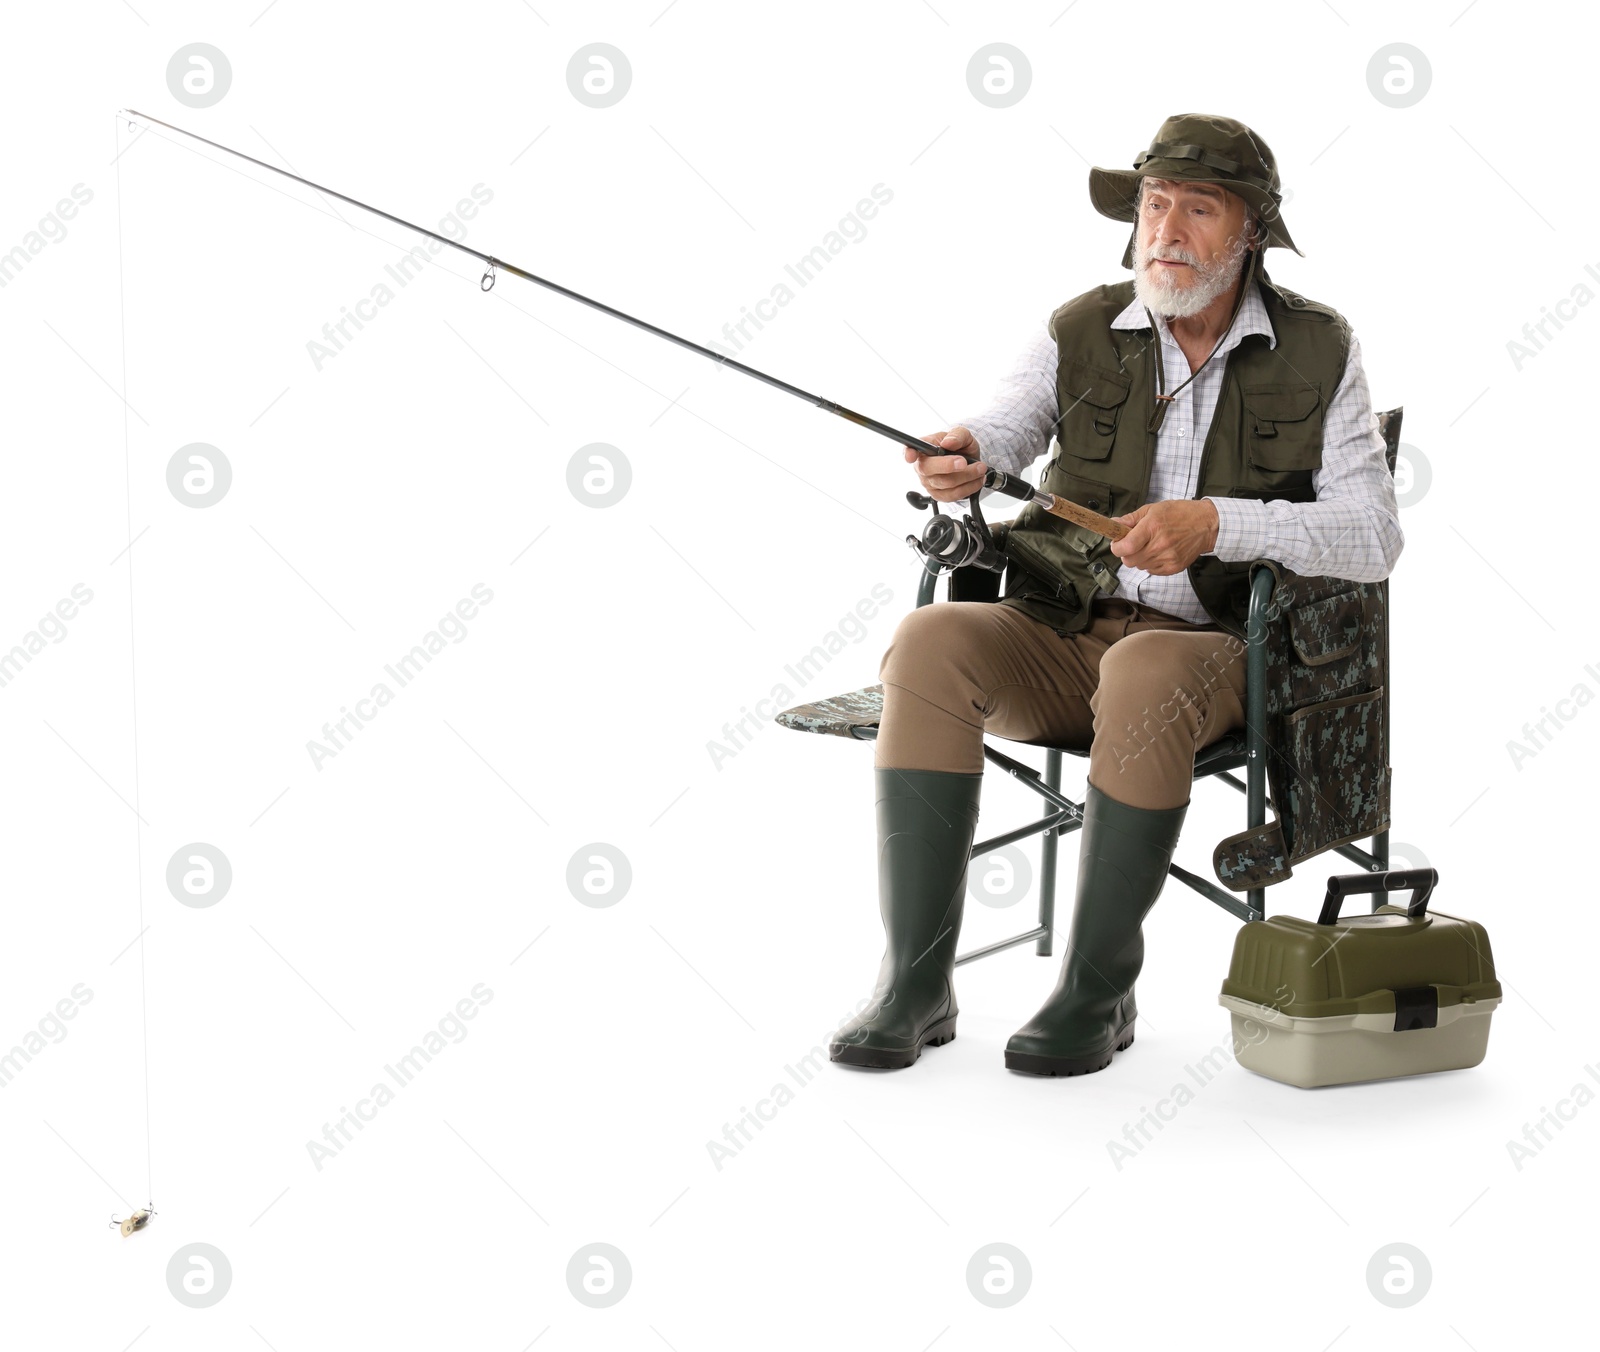 Photo of Fisherman with rod and tackle box on chair against white background